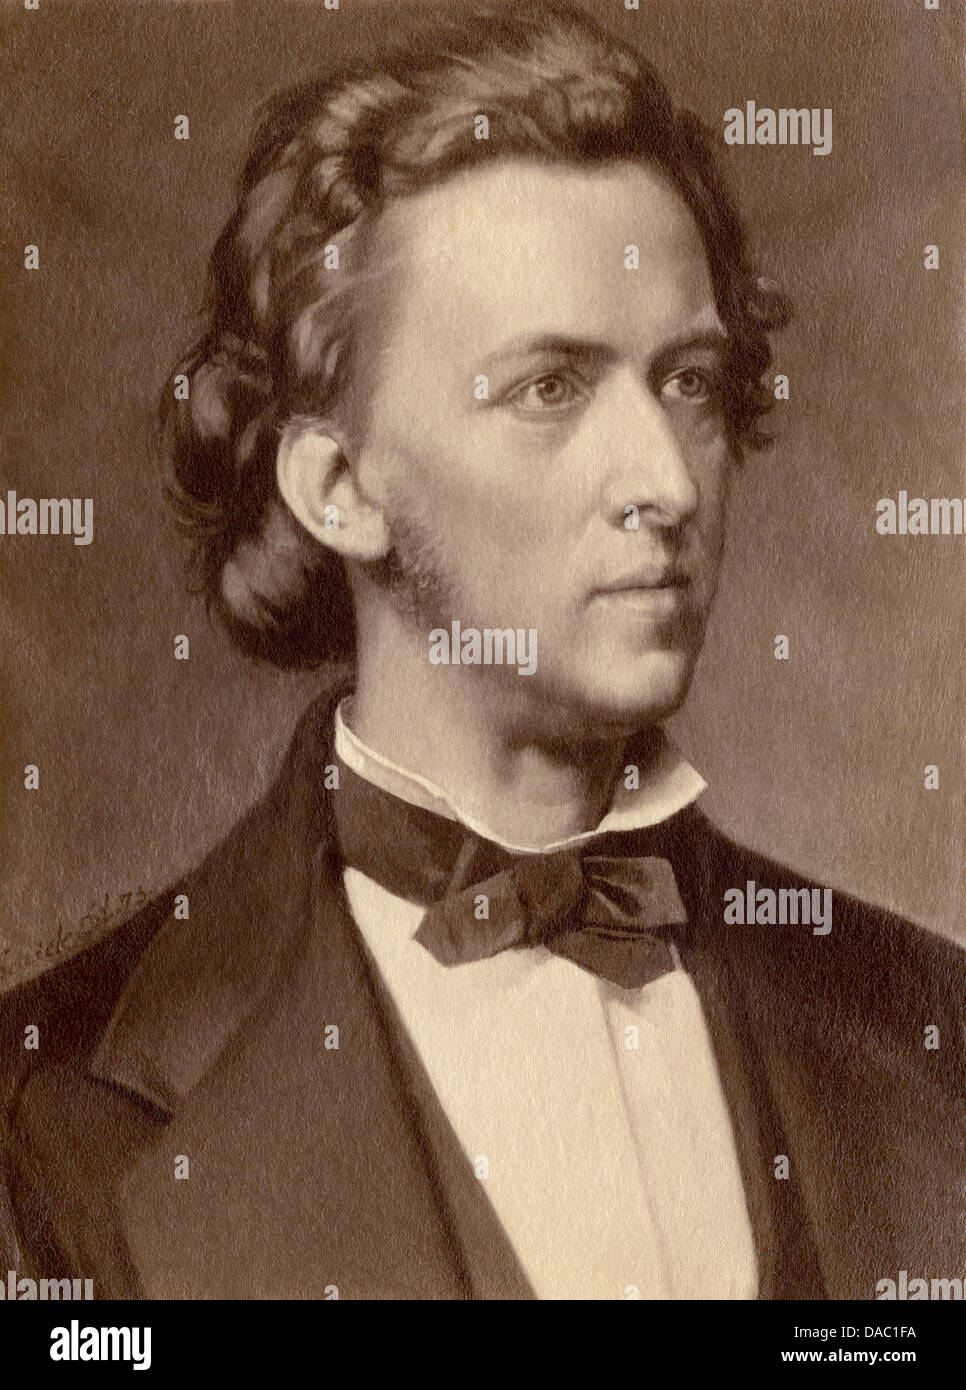 Composer and pianist Frederic Chopin. Photograph Stock Photo